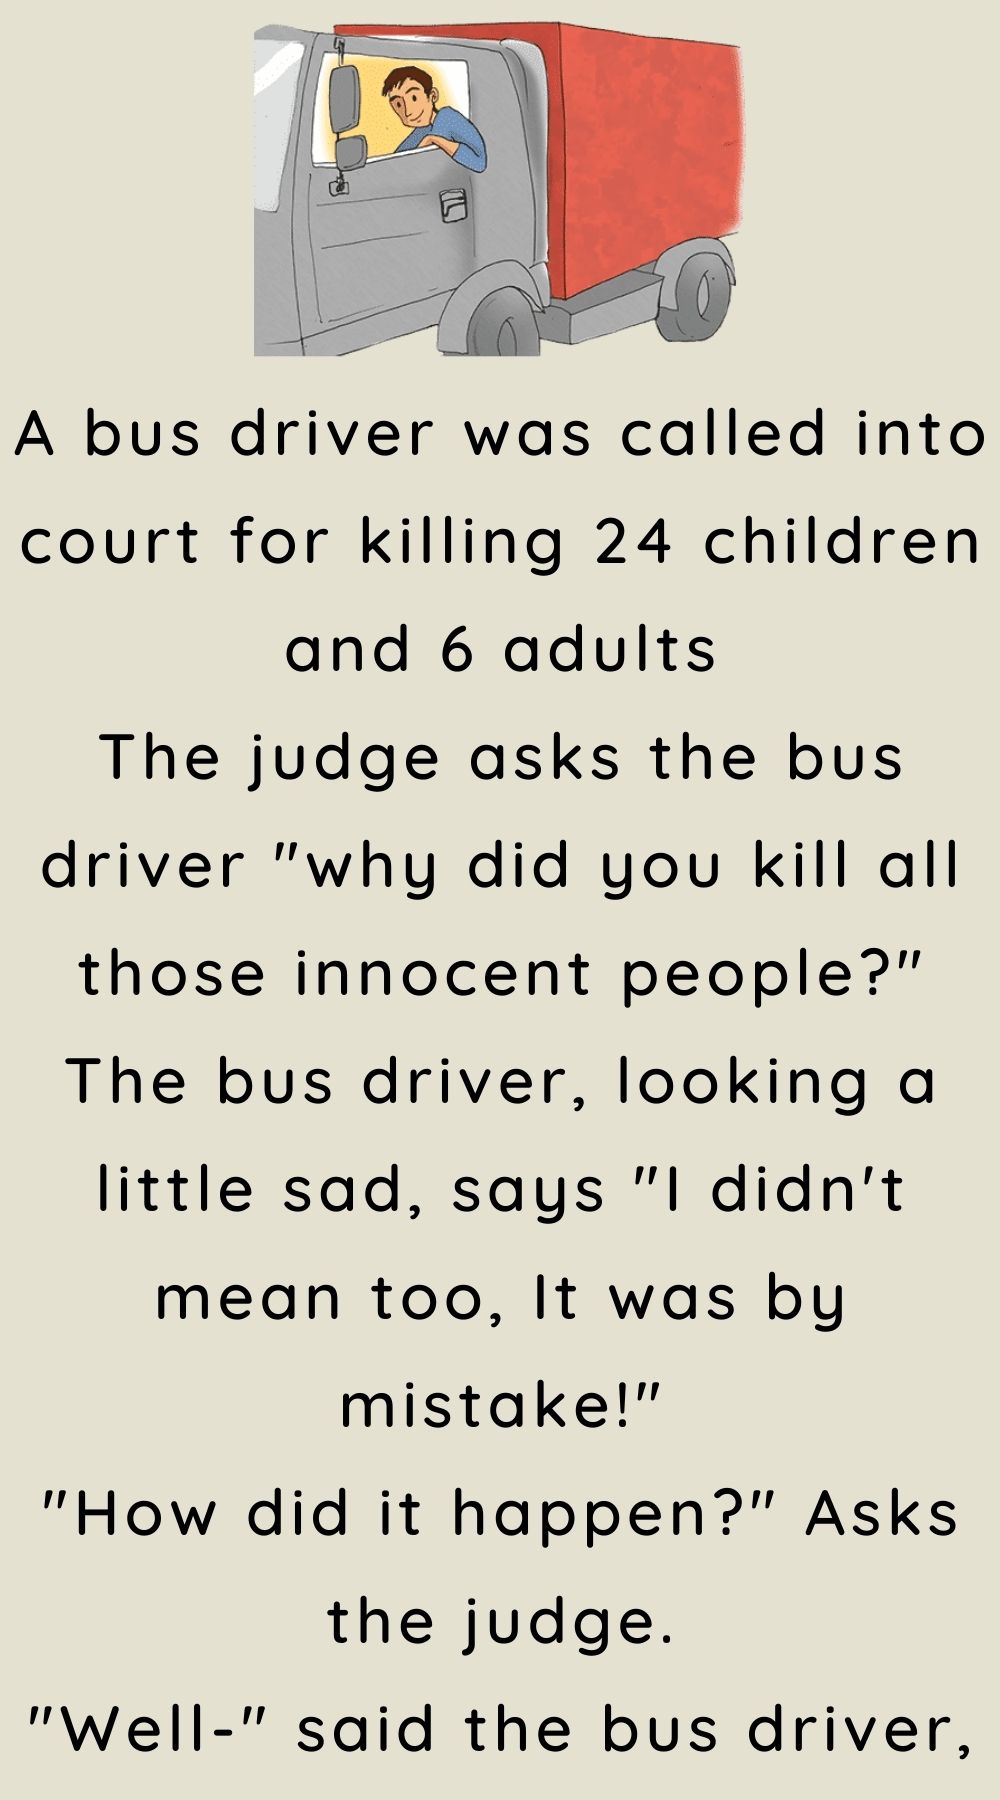 A bus driver was called into court